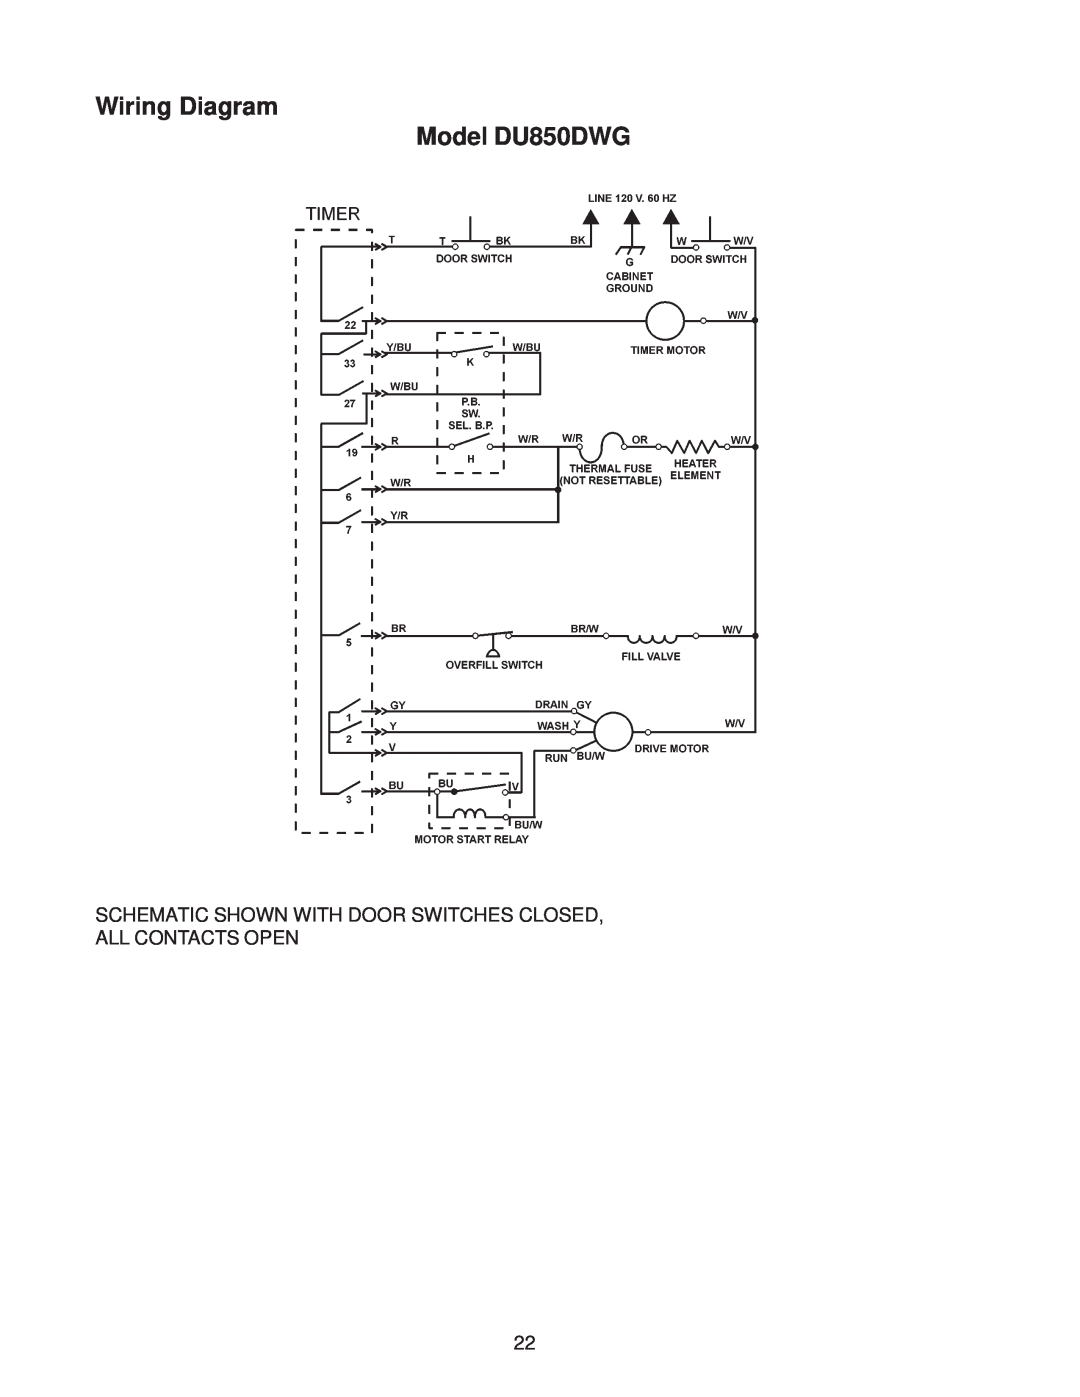 Kenmore DU910PFG, DU890DWG Wiring Diagram Model DU850DWG, Schematic Shown With Door Switches Closed, All Contacts Open 